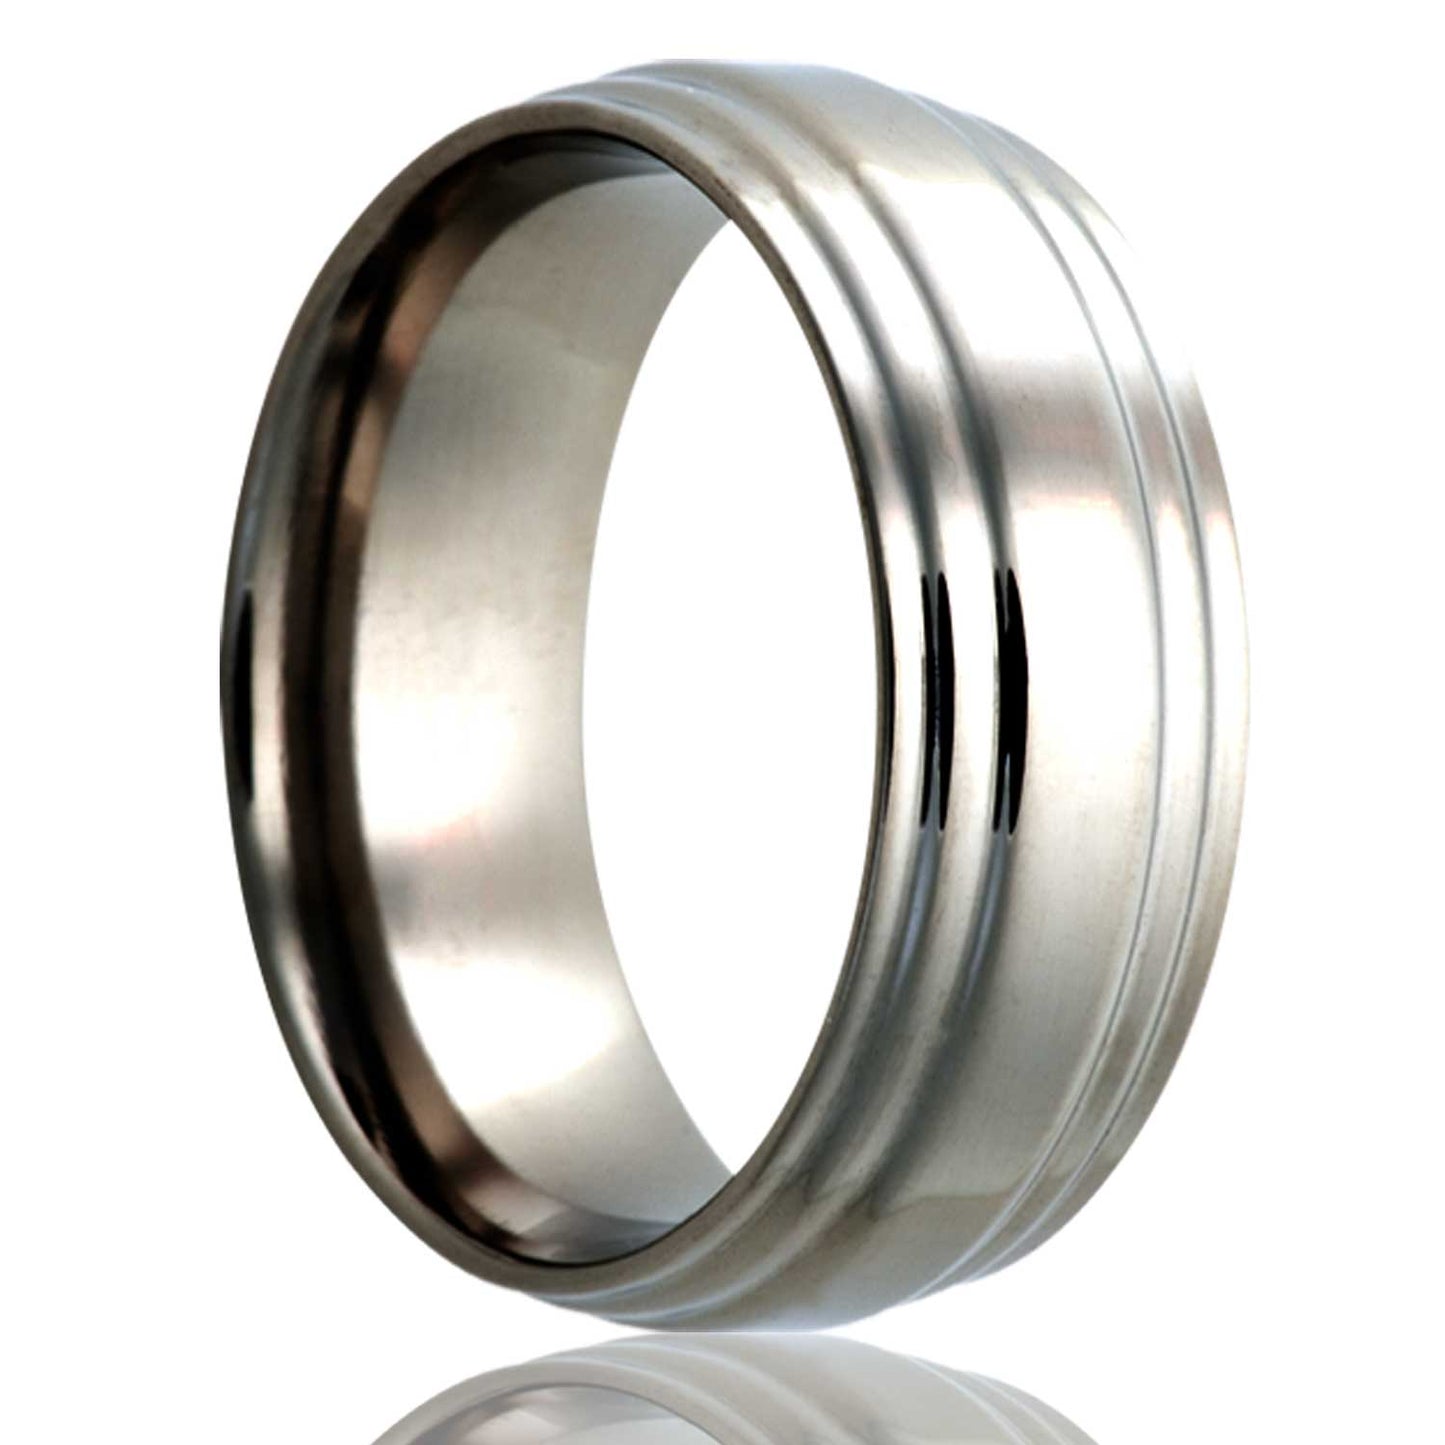 A titanium wedding band with stair steps edges displayed on a neutral white background.